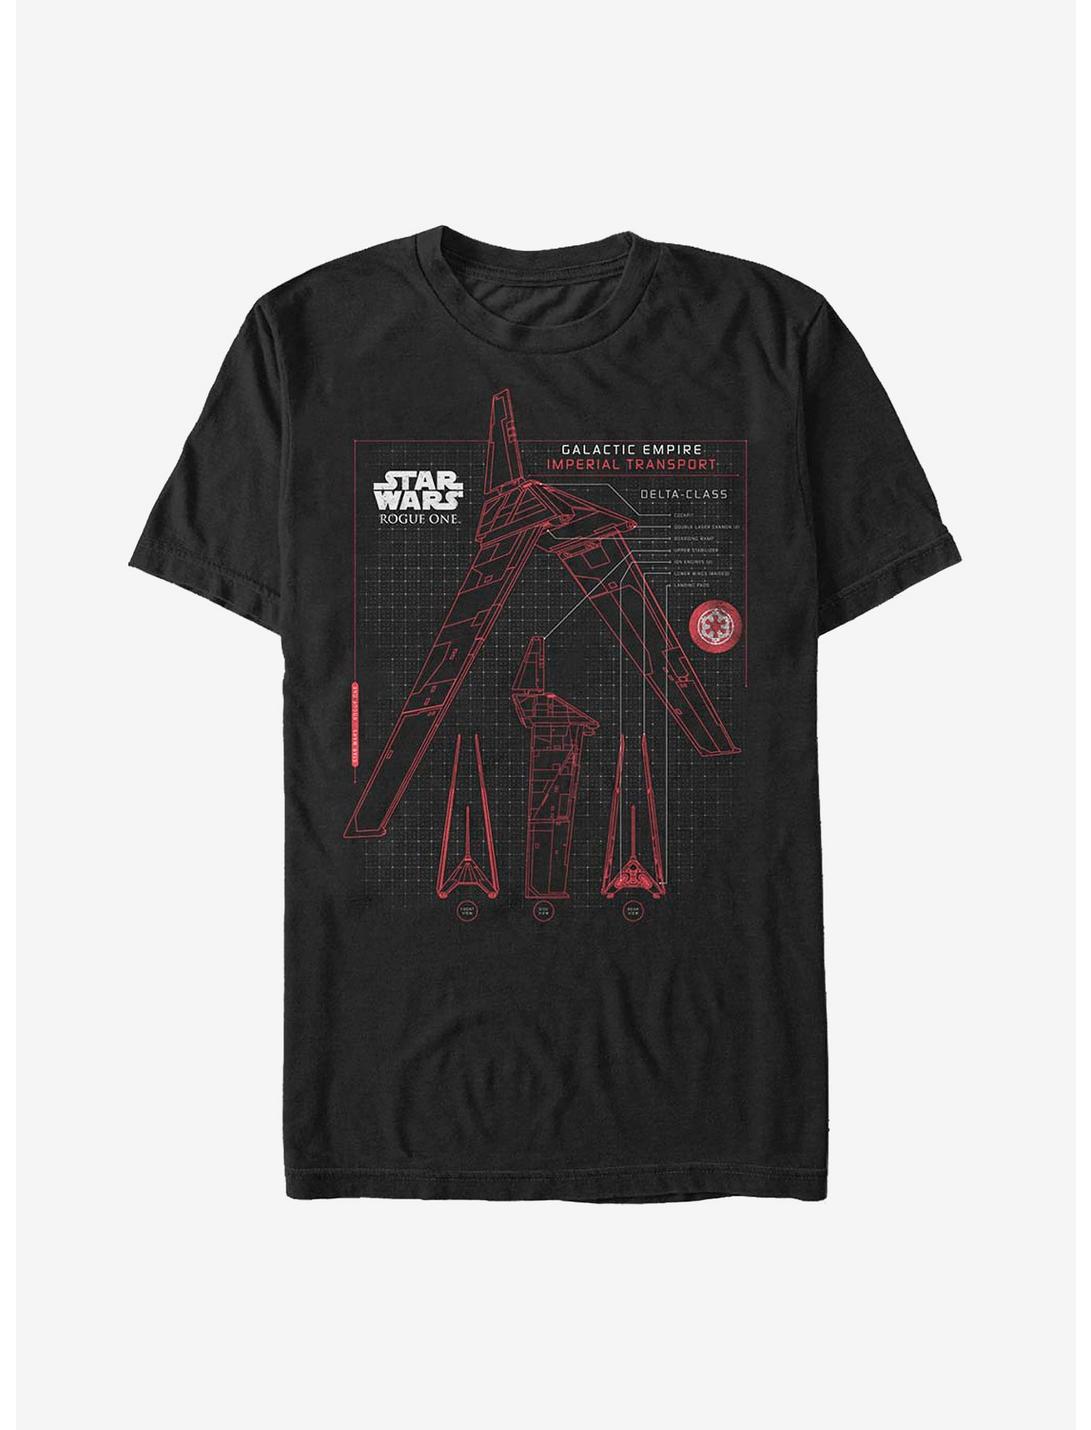 Star Wars Rogue One: A Star Wars Story Imperial Shuttle T-Shirt, BLACK, hi-res